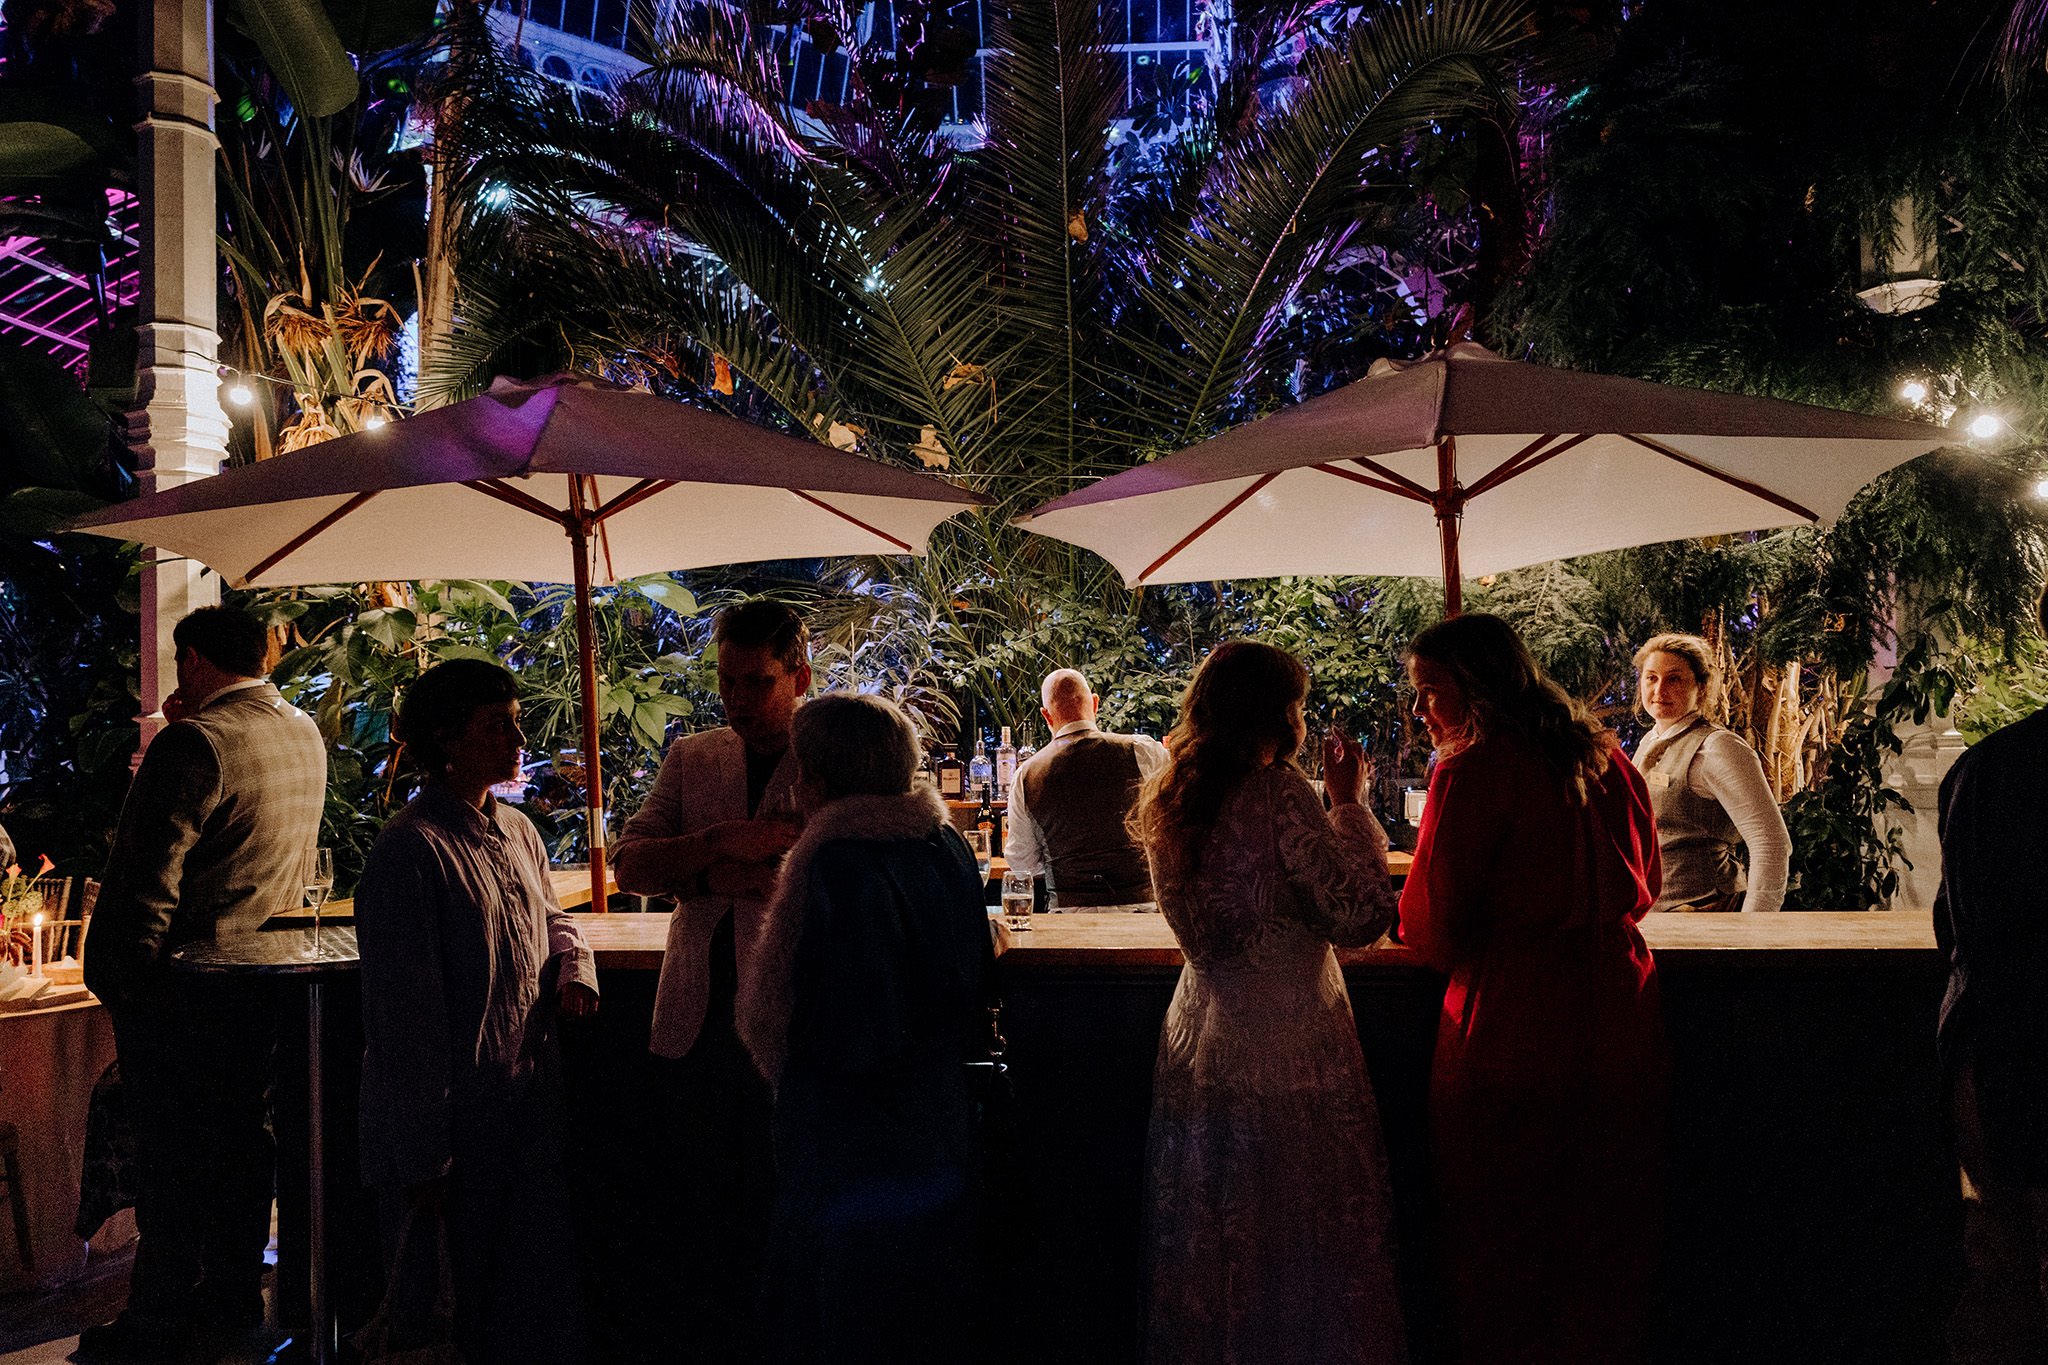 The bar in the evening at Sefton Park Palm House